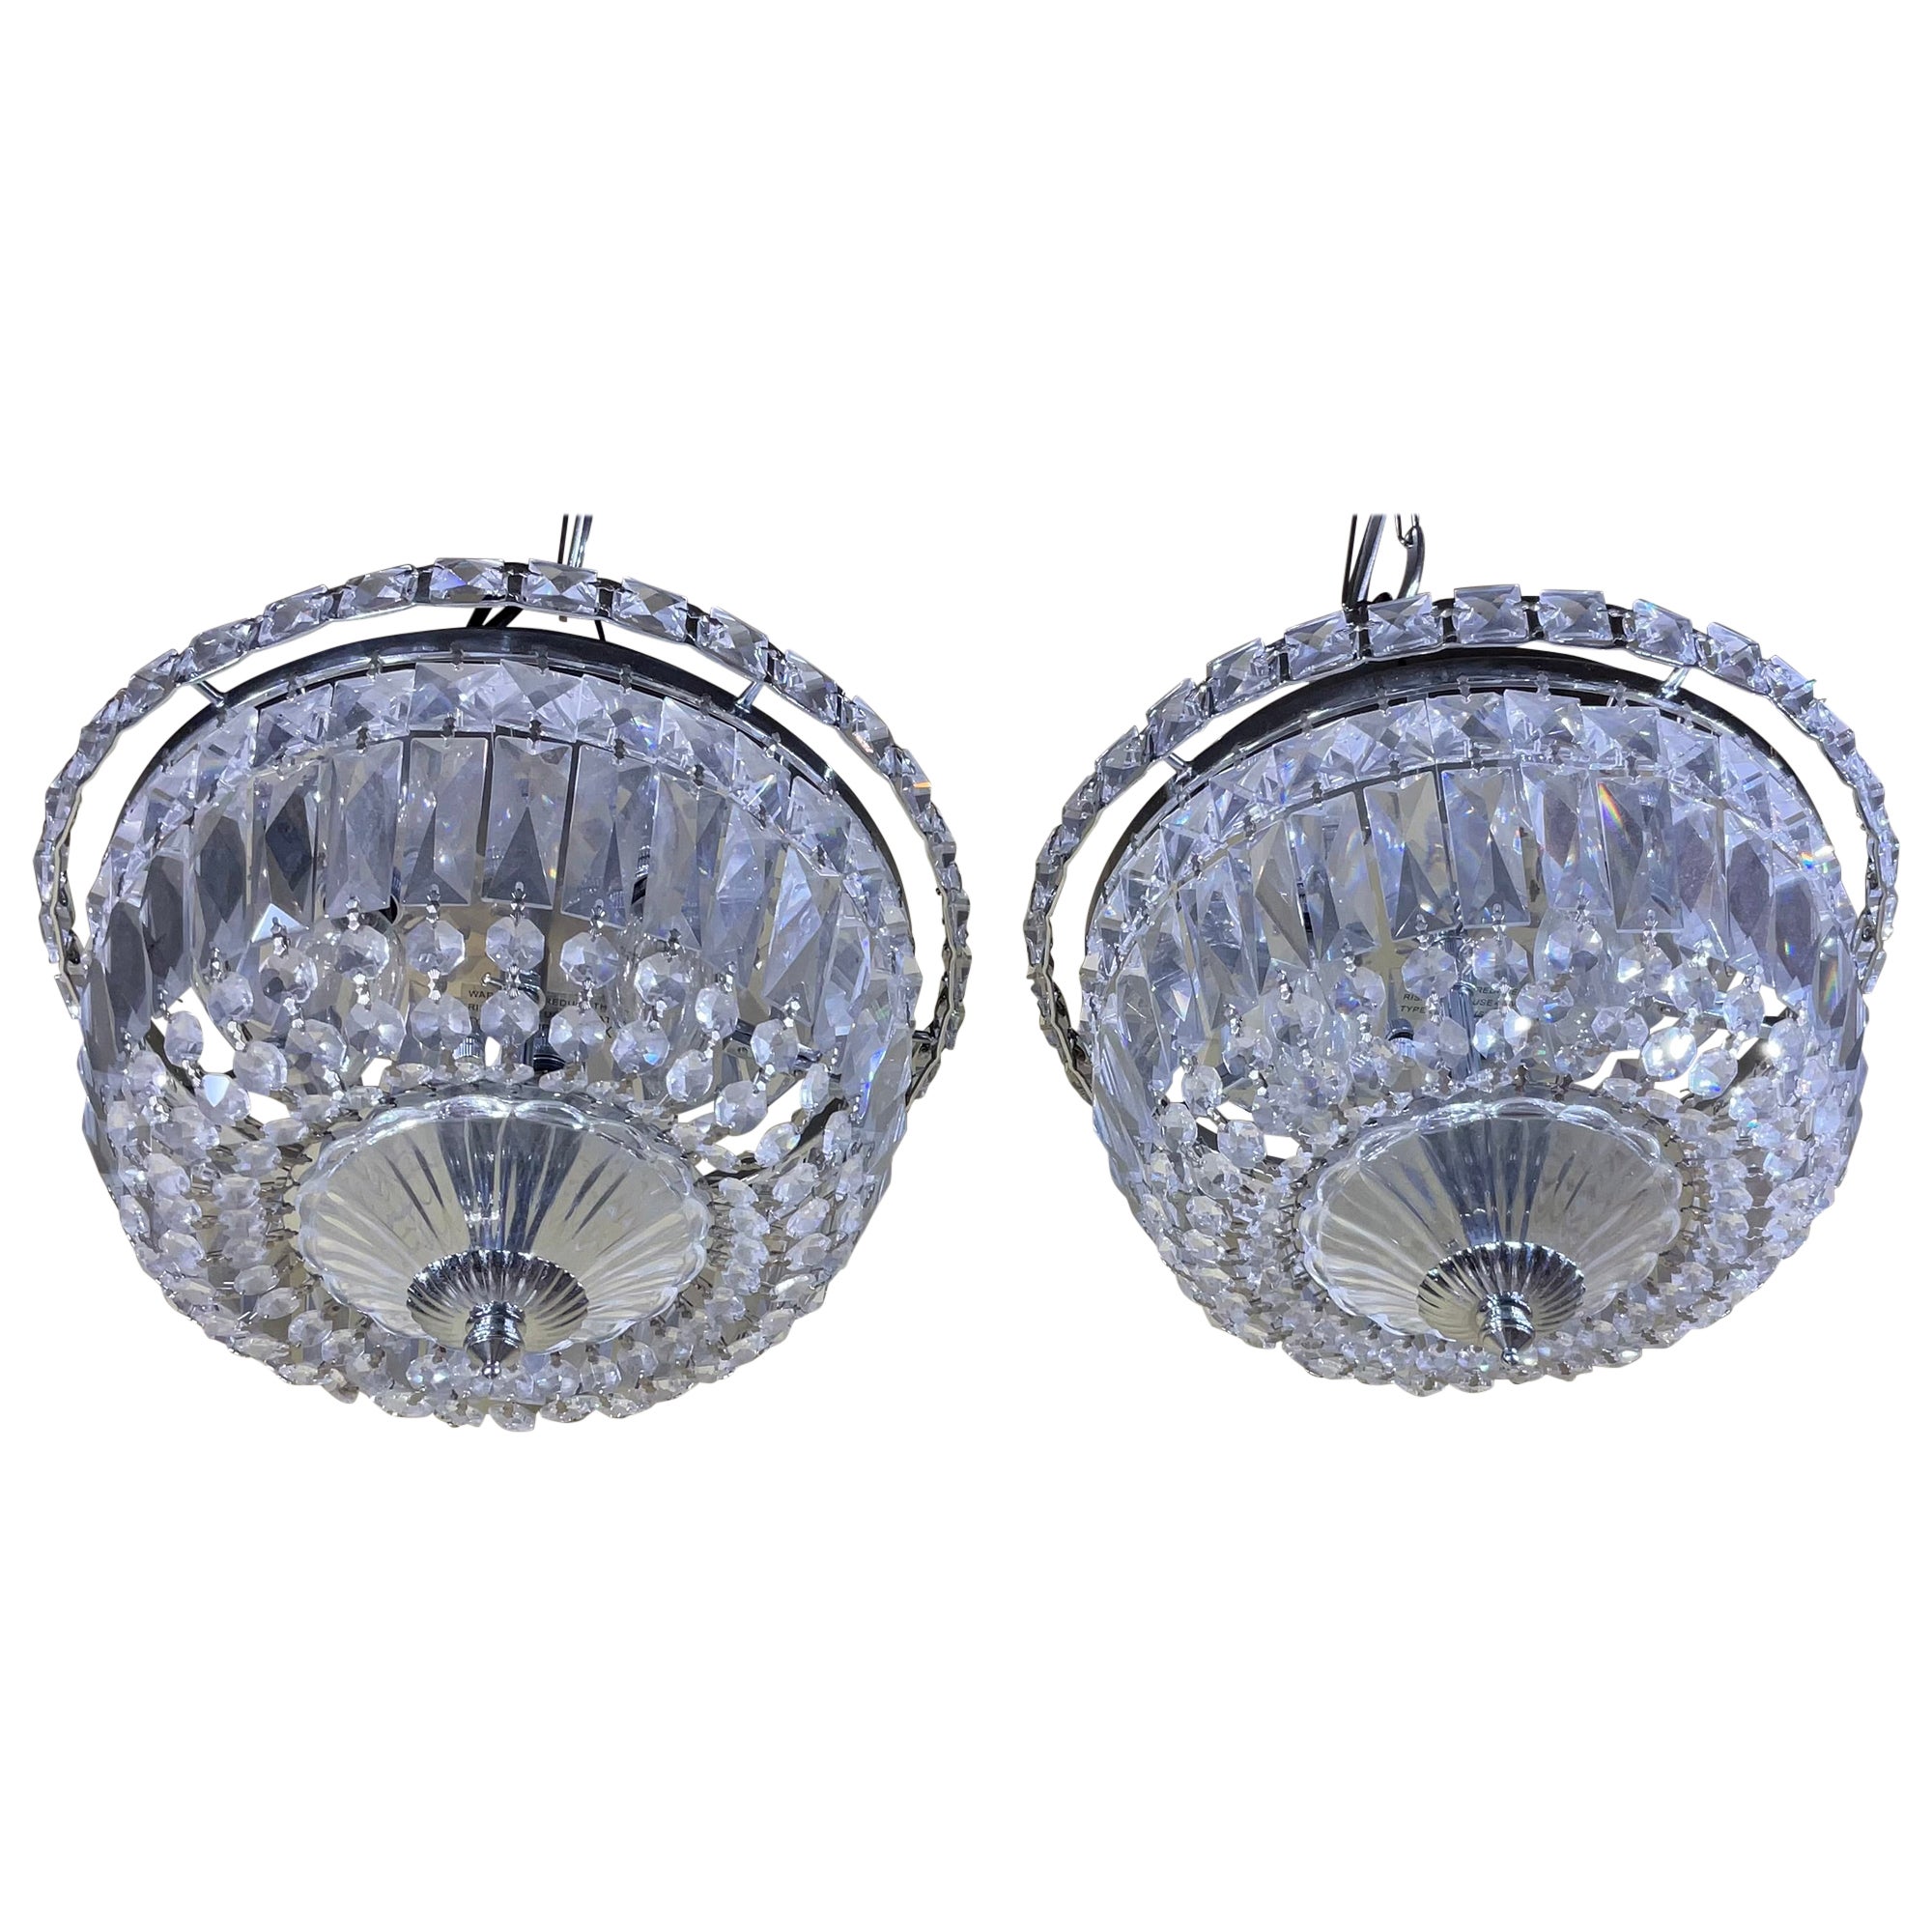 Paar 1940's Hollywood Style Crystal Drop-Down Flush Mount Kronleuchter